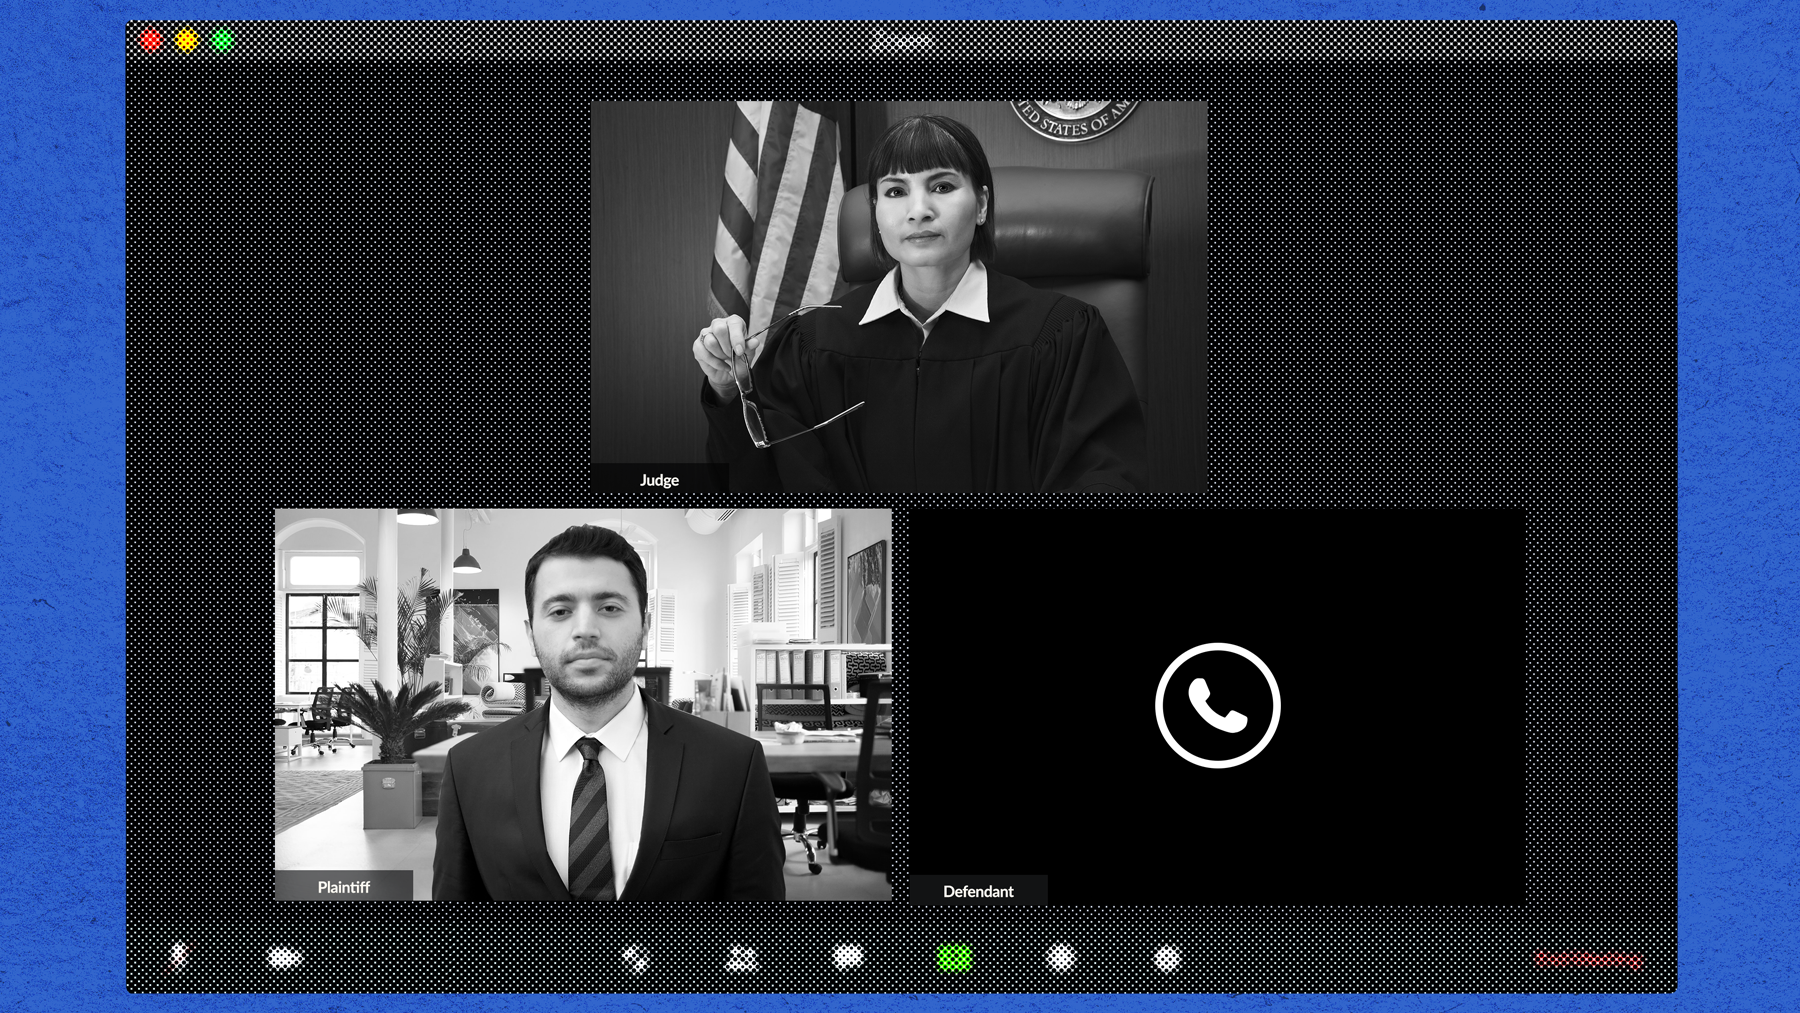 Image depicting a virtual screen with a judge in the top box, a man in a suit labeled Plaintiff in the bottom left box, and a black box on the bottom right with a telephone icon, labeled Defendant.